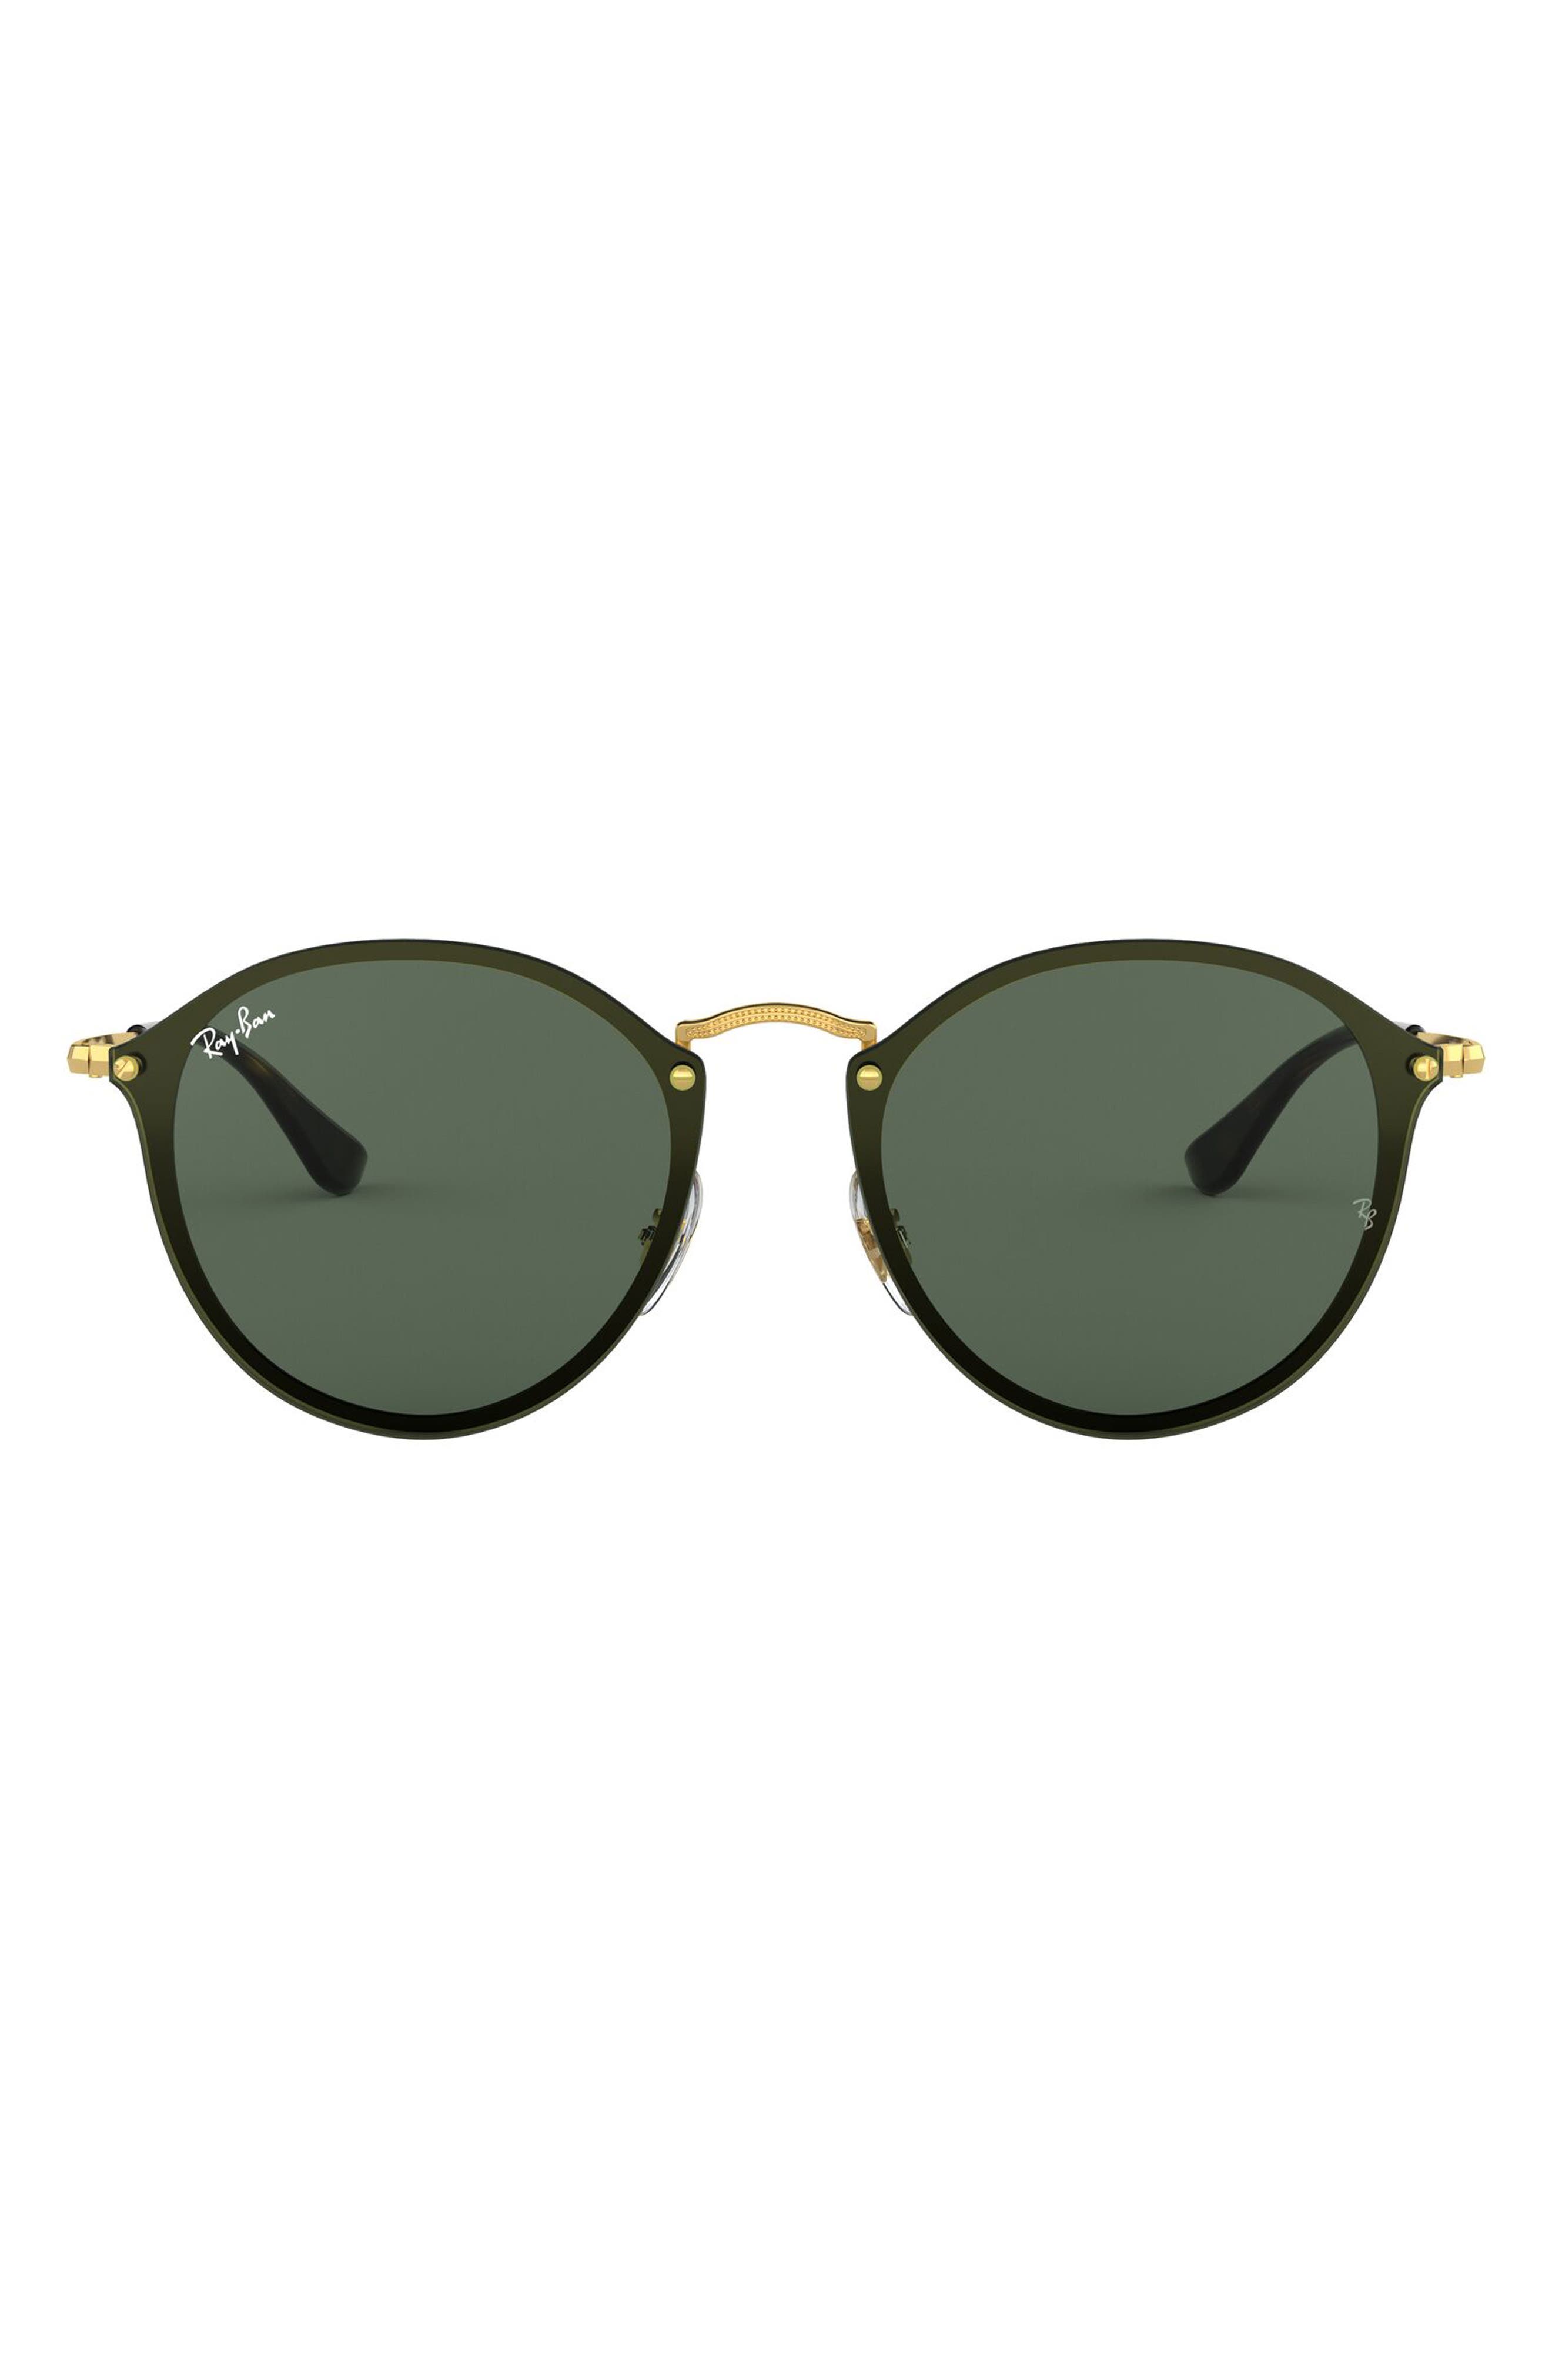 ray ban sunglasses for women price